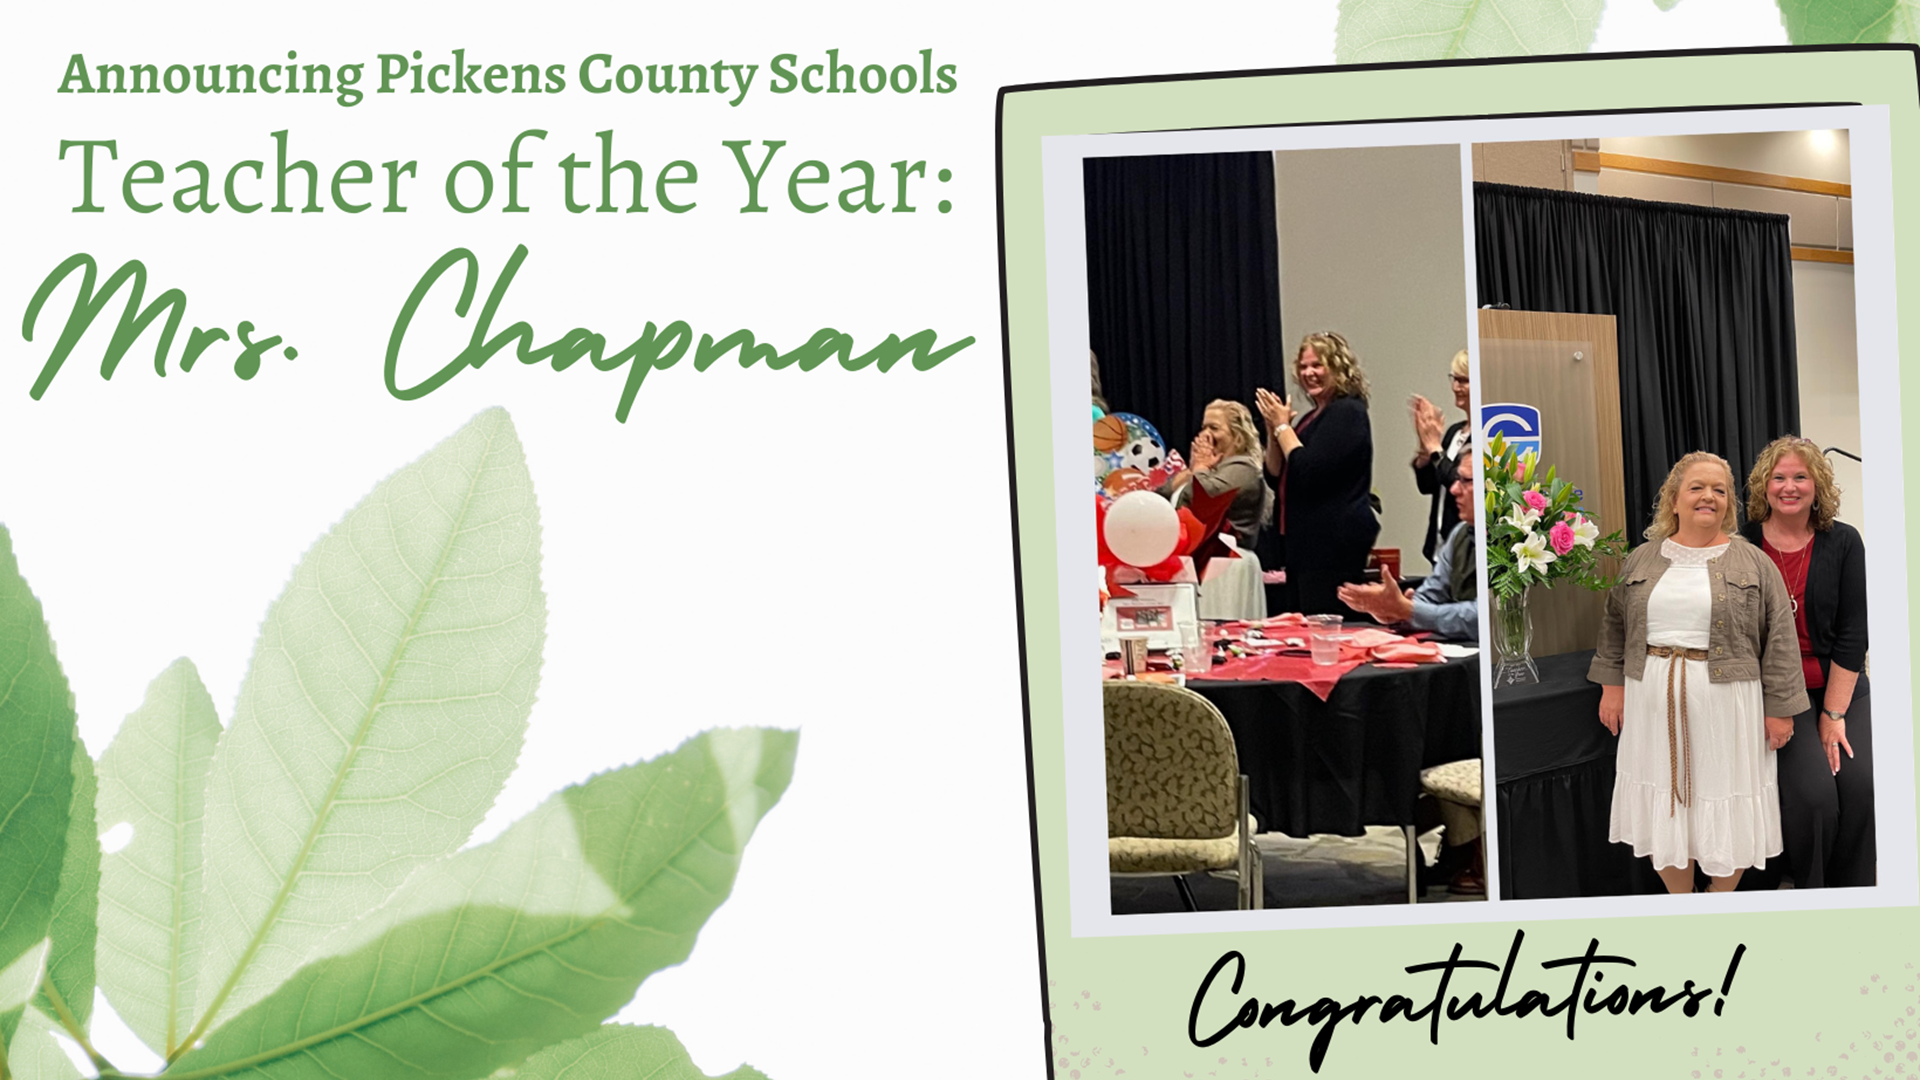 Pickens County's Teacher of the Year: Mrs. Chapman